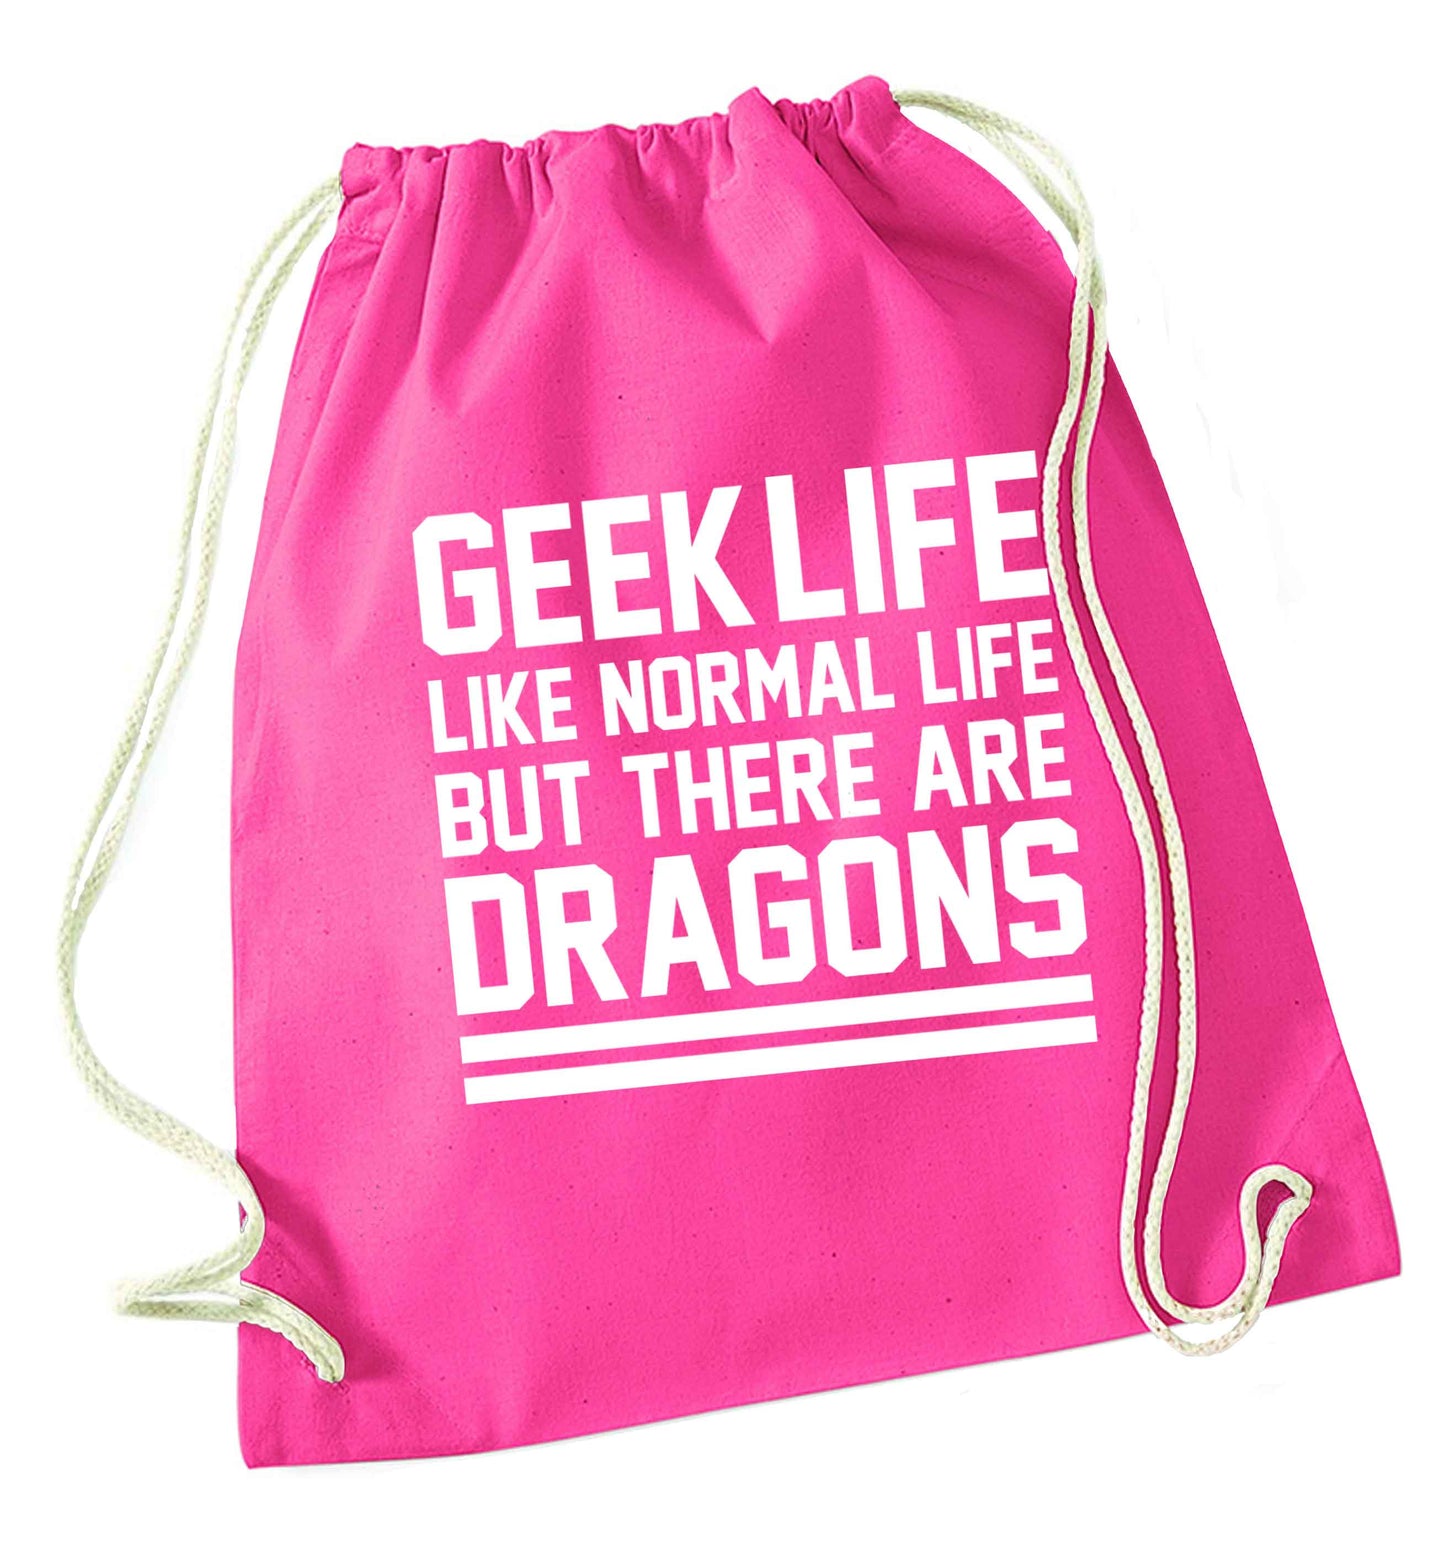 Geek life like normal life but there are dragons pink drawstring bag